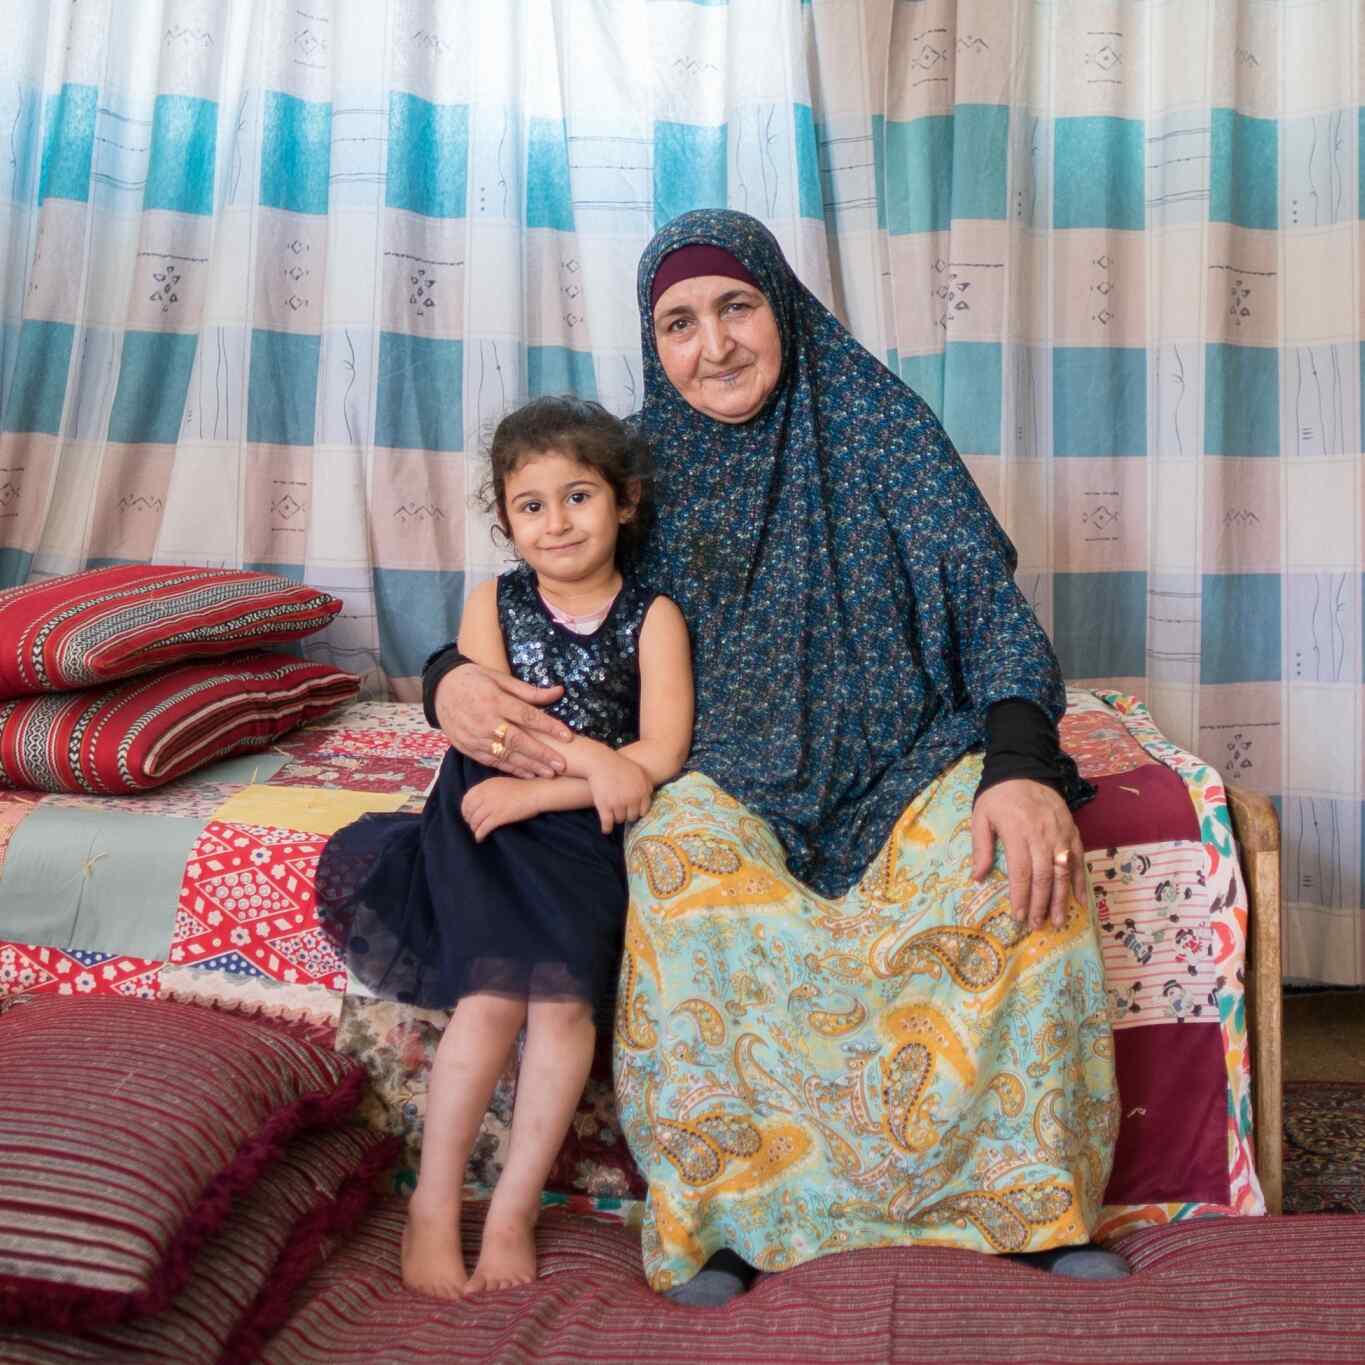 A young girl and her grandmother sit at the edge of a bed and pose for a photo.